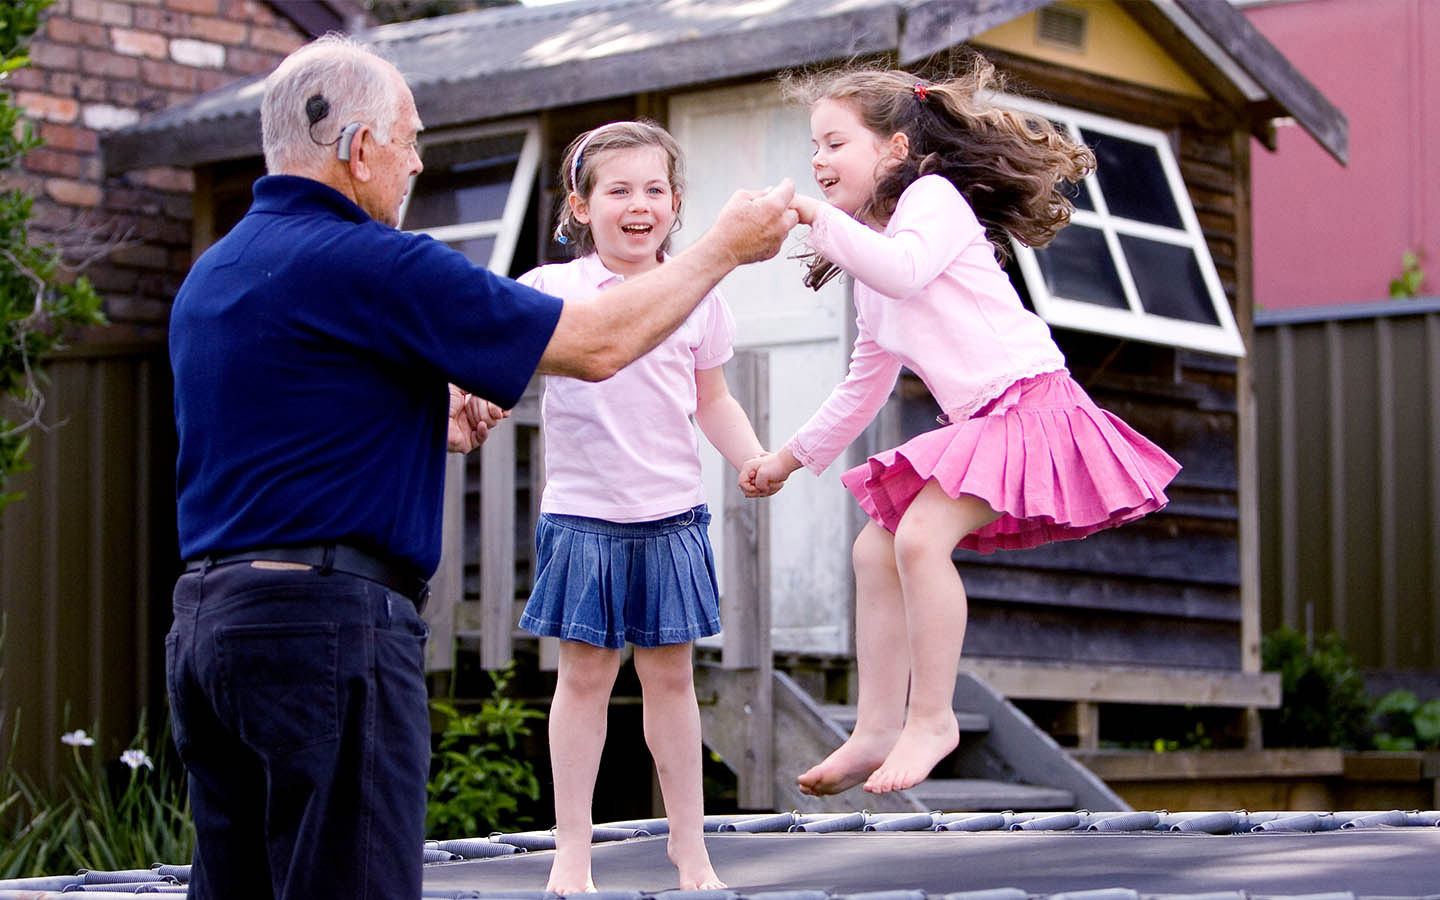 Grandpa playing trampoline with 2 granddaughters